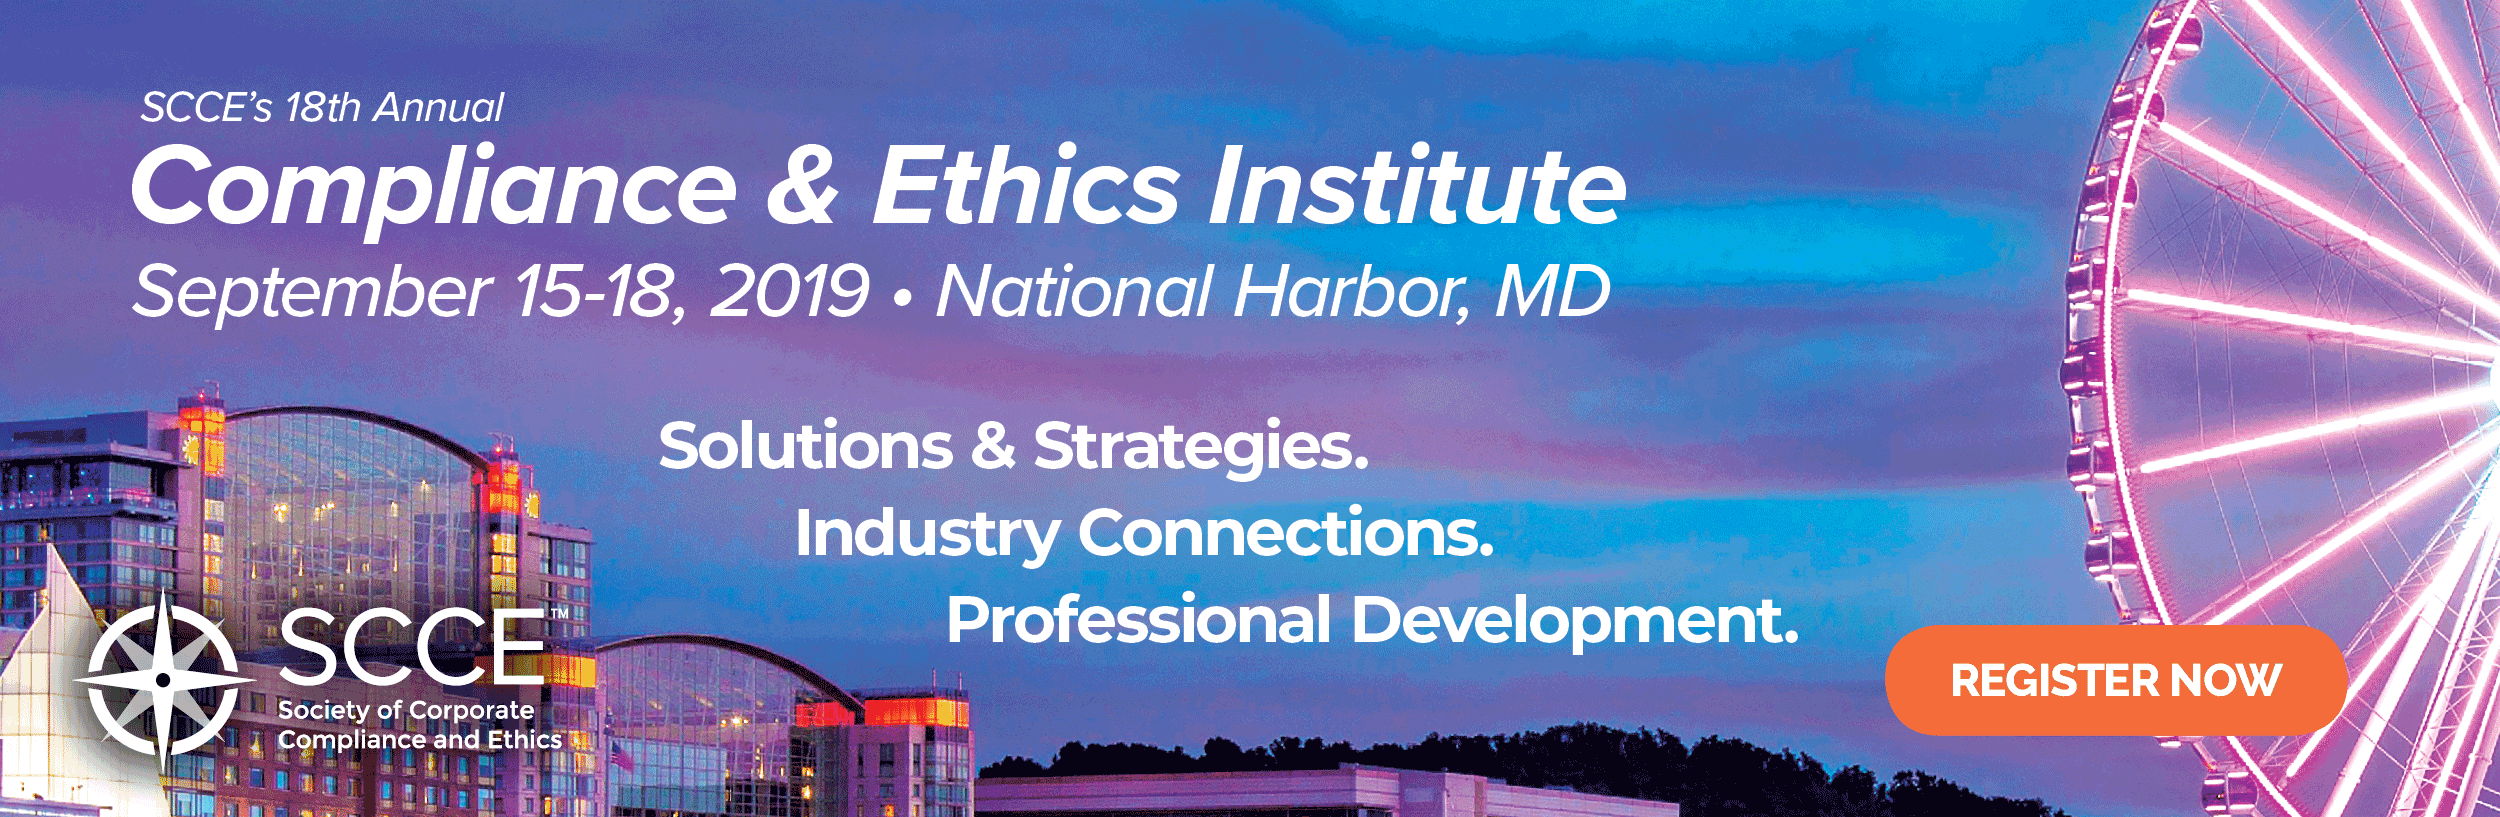 18th Annual Compliance and Ethics Institute 2019 